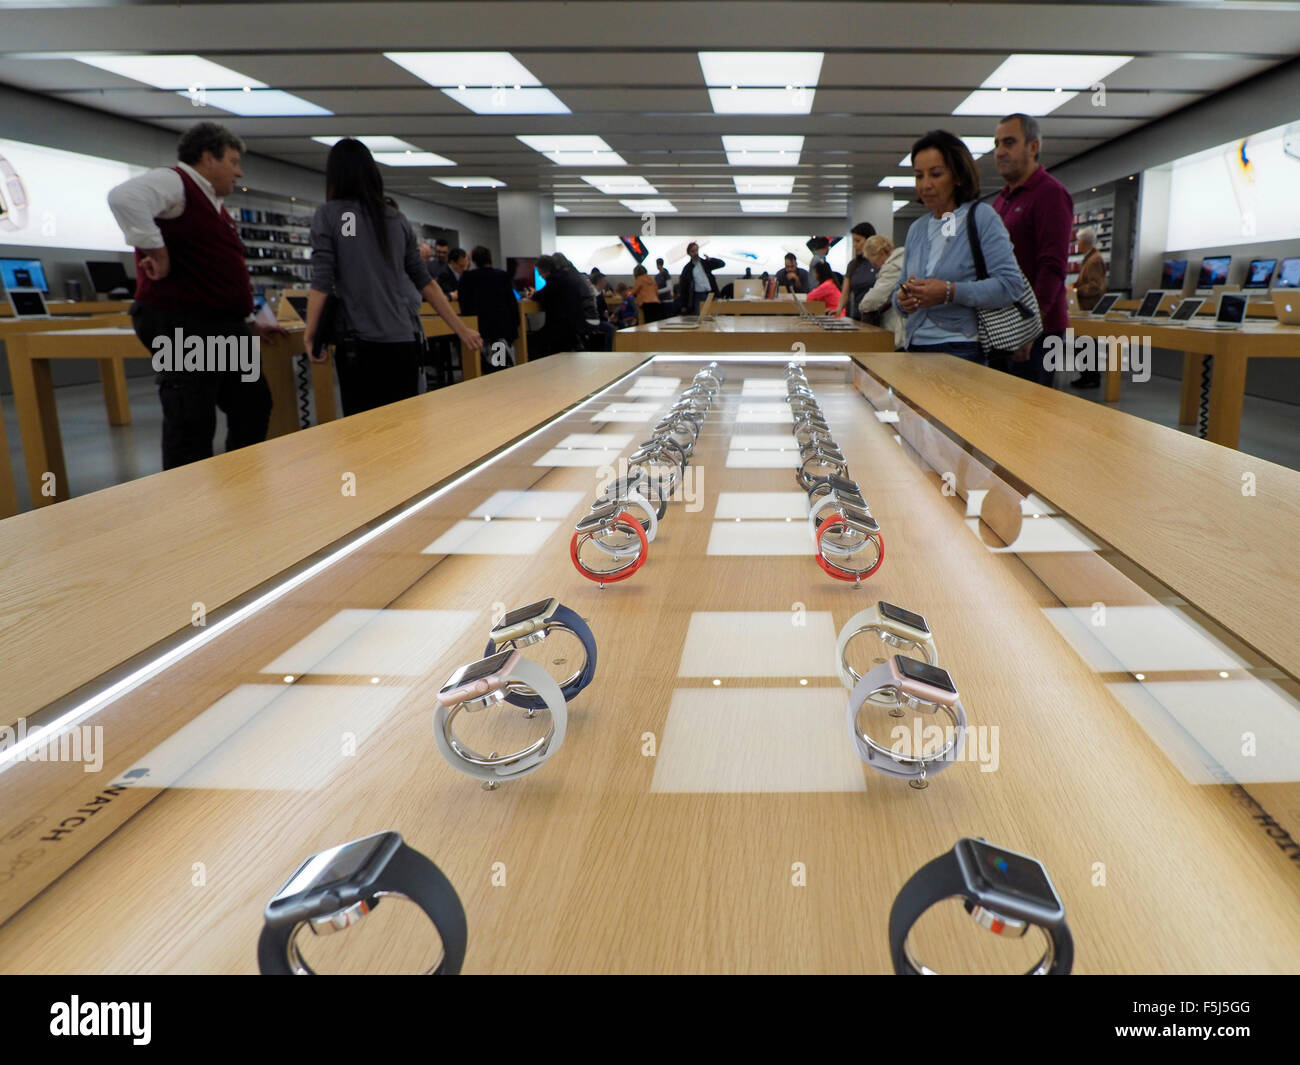 Applewatches on display in the Apple Store in Euroma2 shopping mall in Rome, Italy Stock Photo